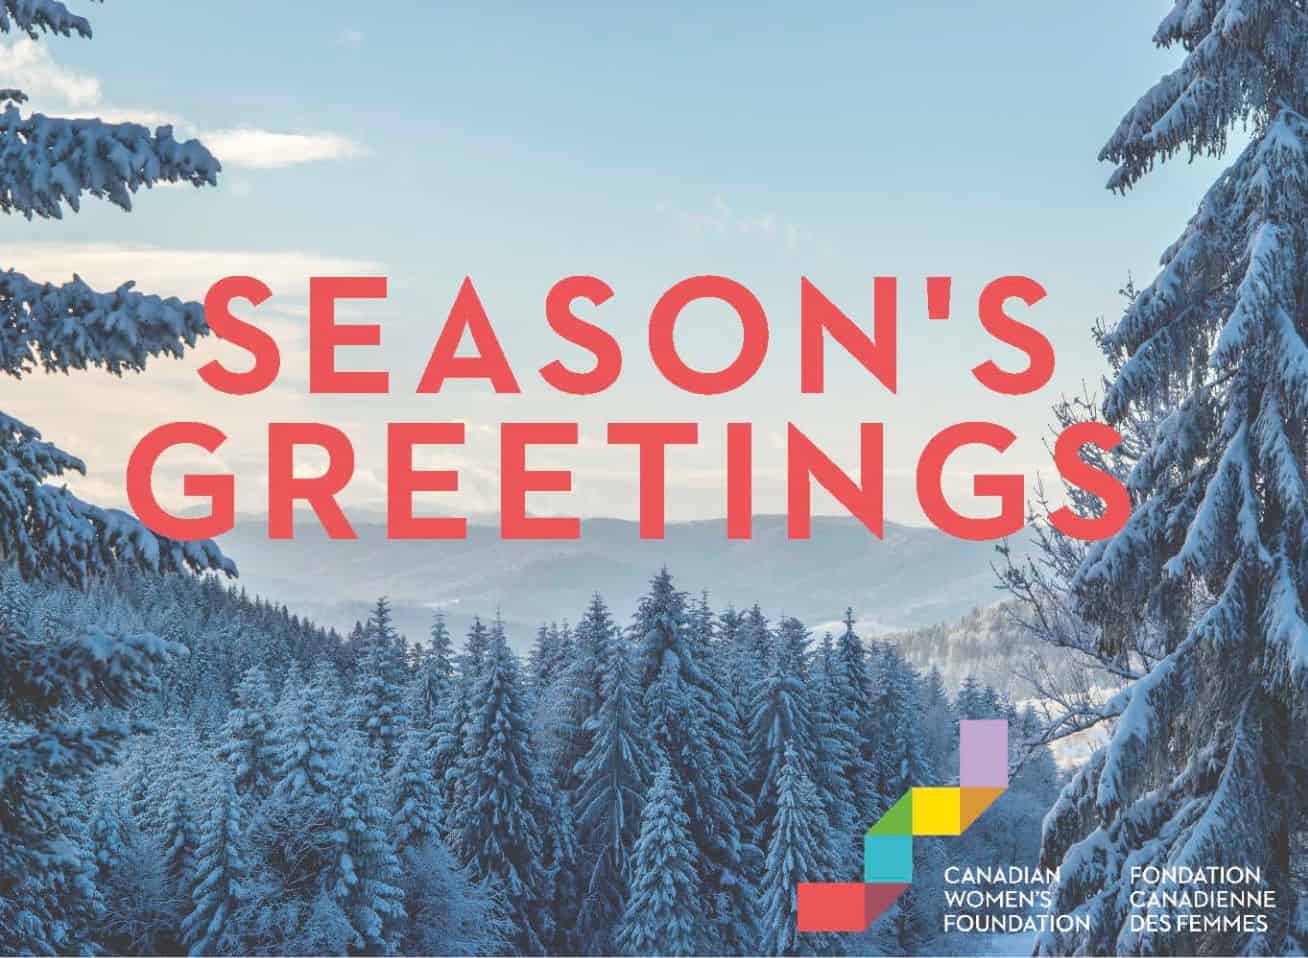 E-card image showing snow-covered trees and seasons greetings message